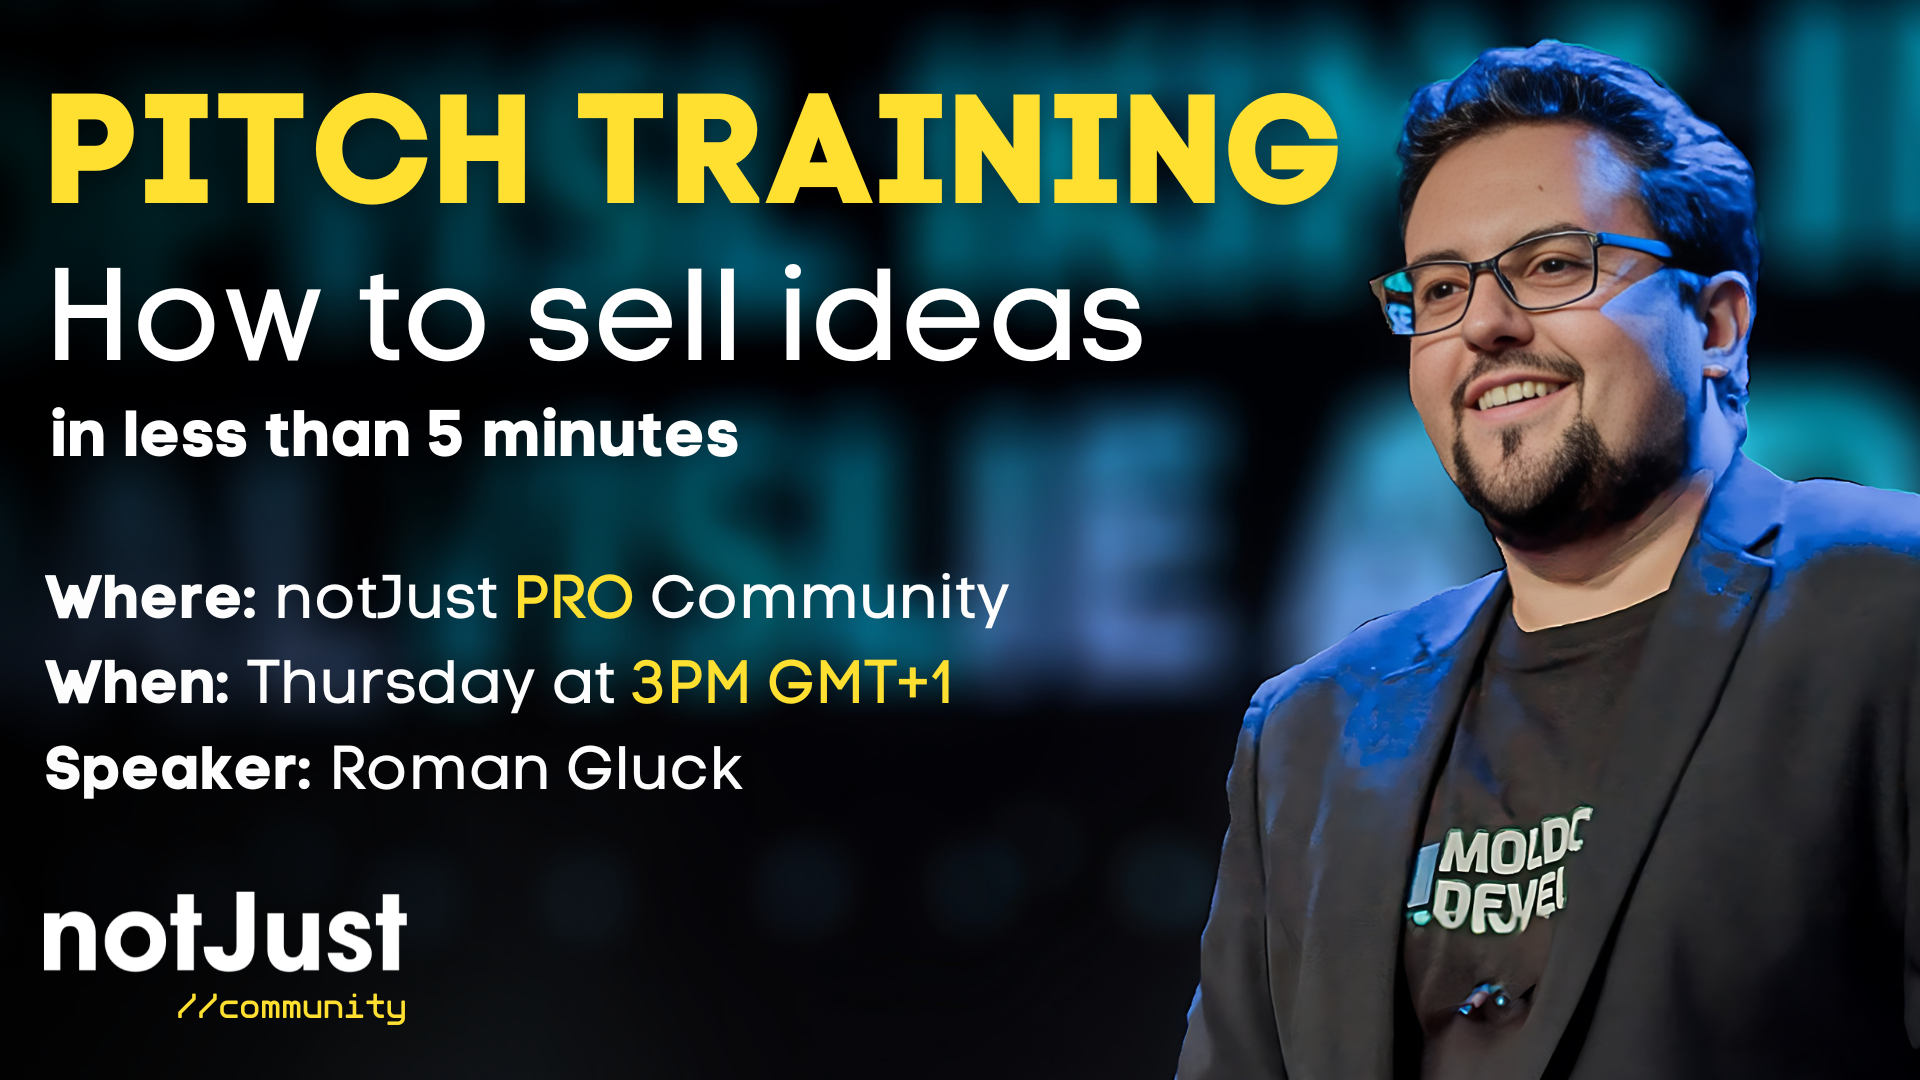 Pitch Training - How to sell ideas in less than 5 minutes